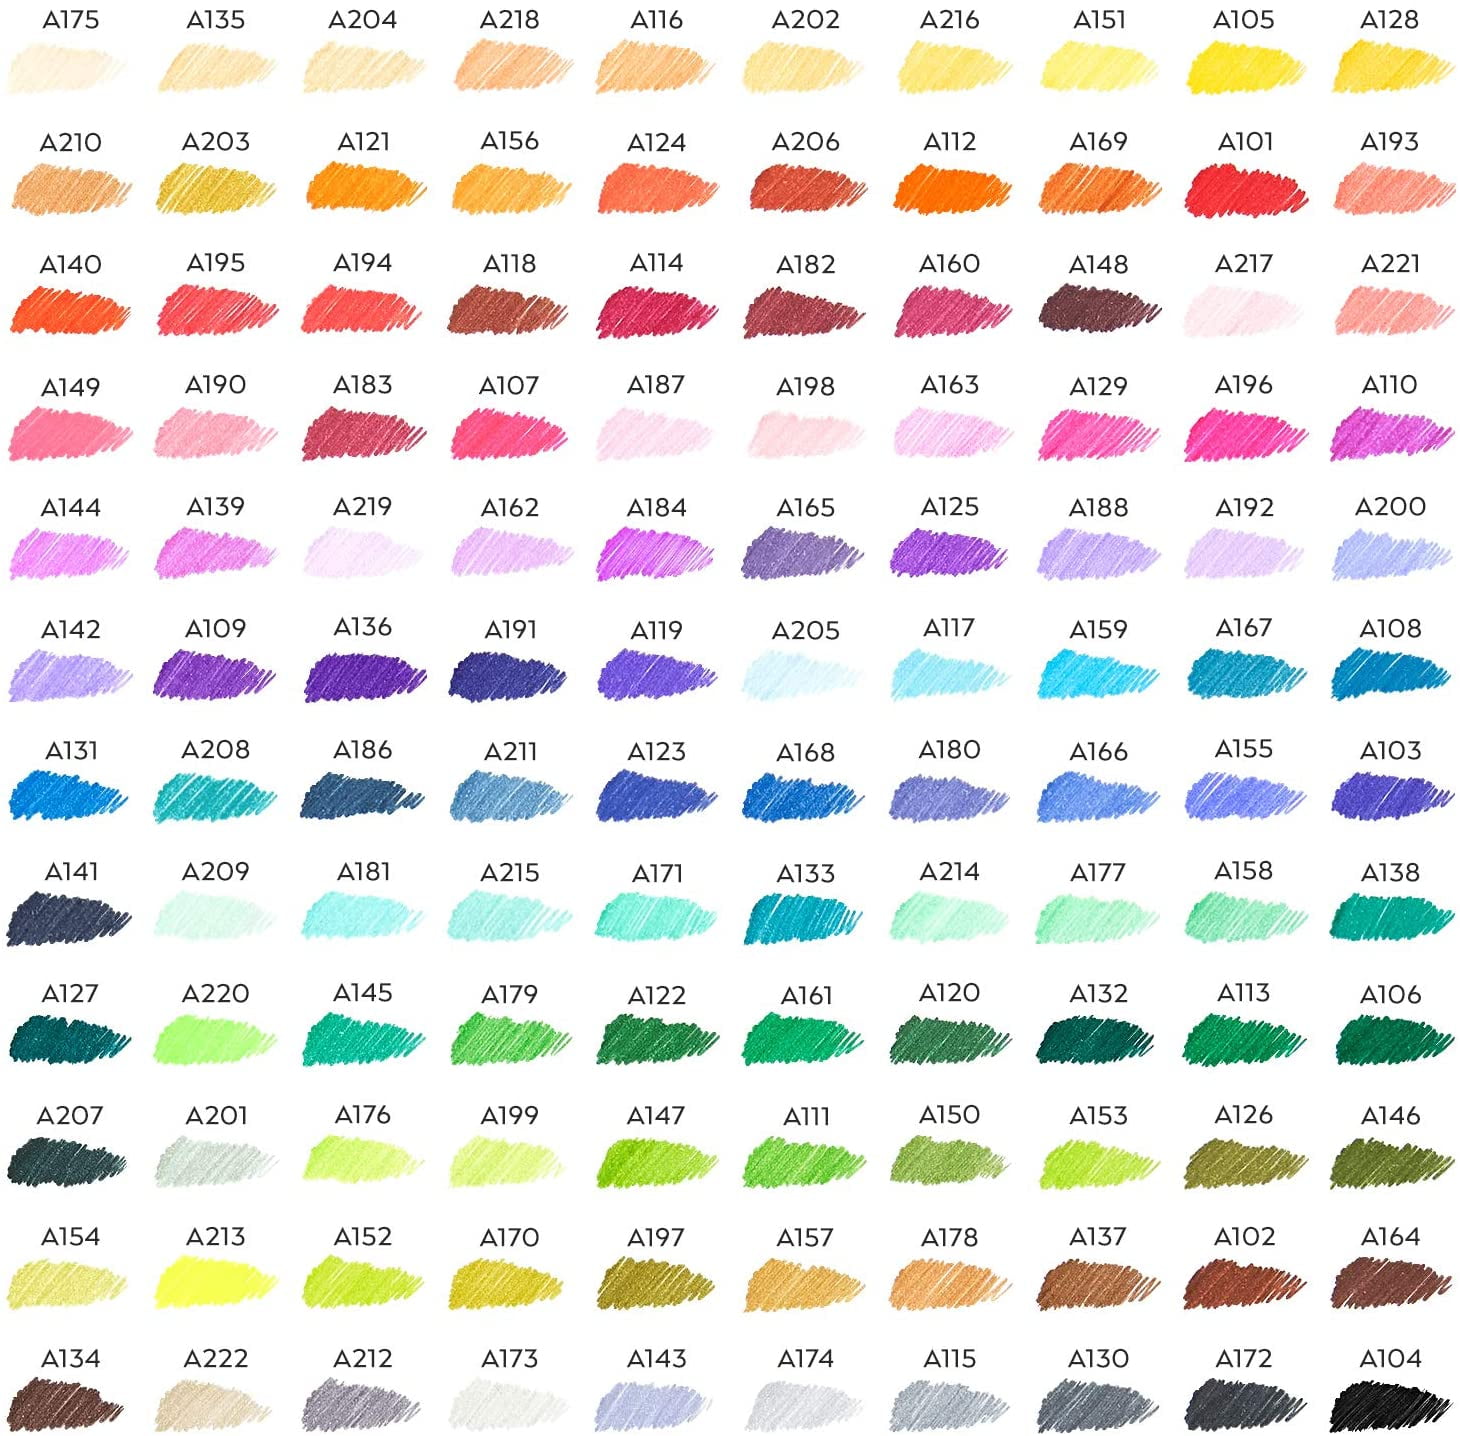 Arteza Fine Point Acrylic Paint Markers Swatch Sheet - Instant Digital  Download file